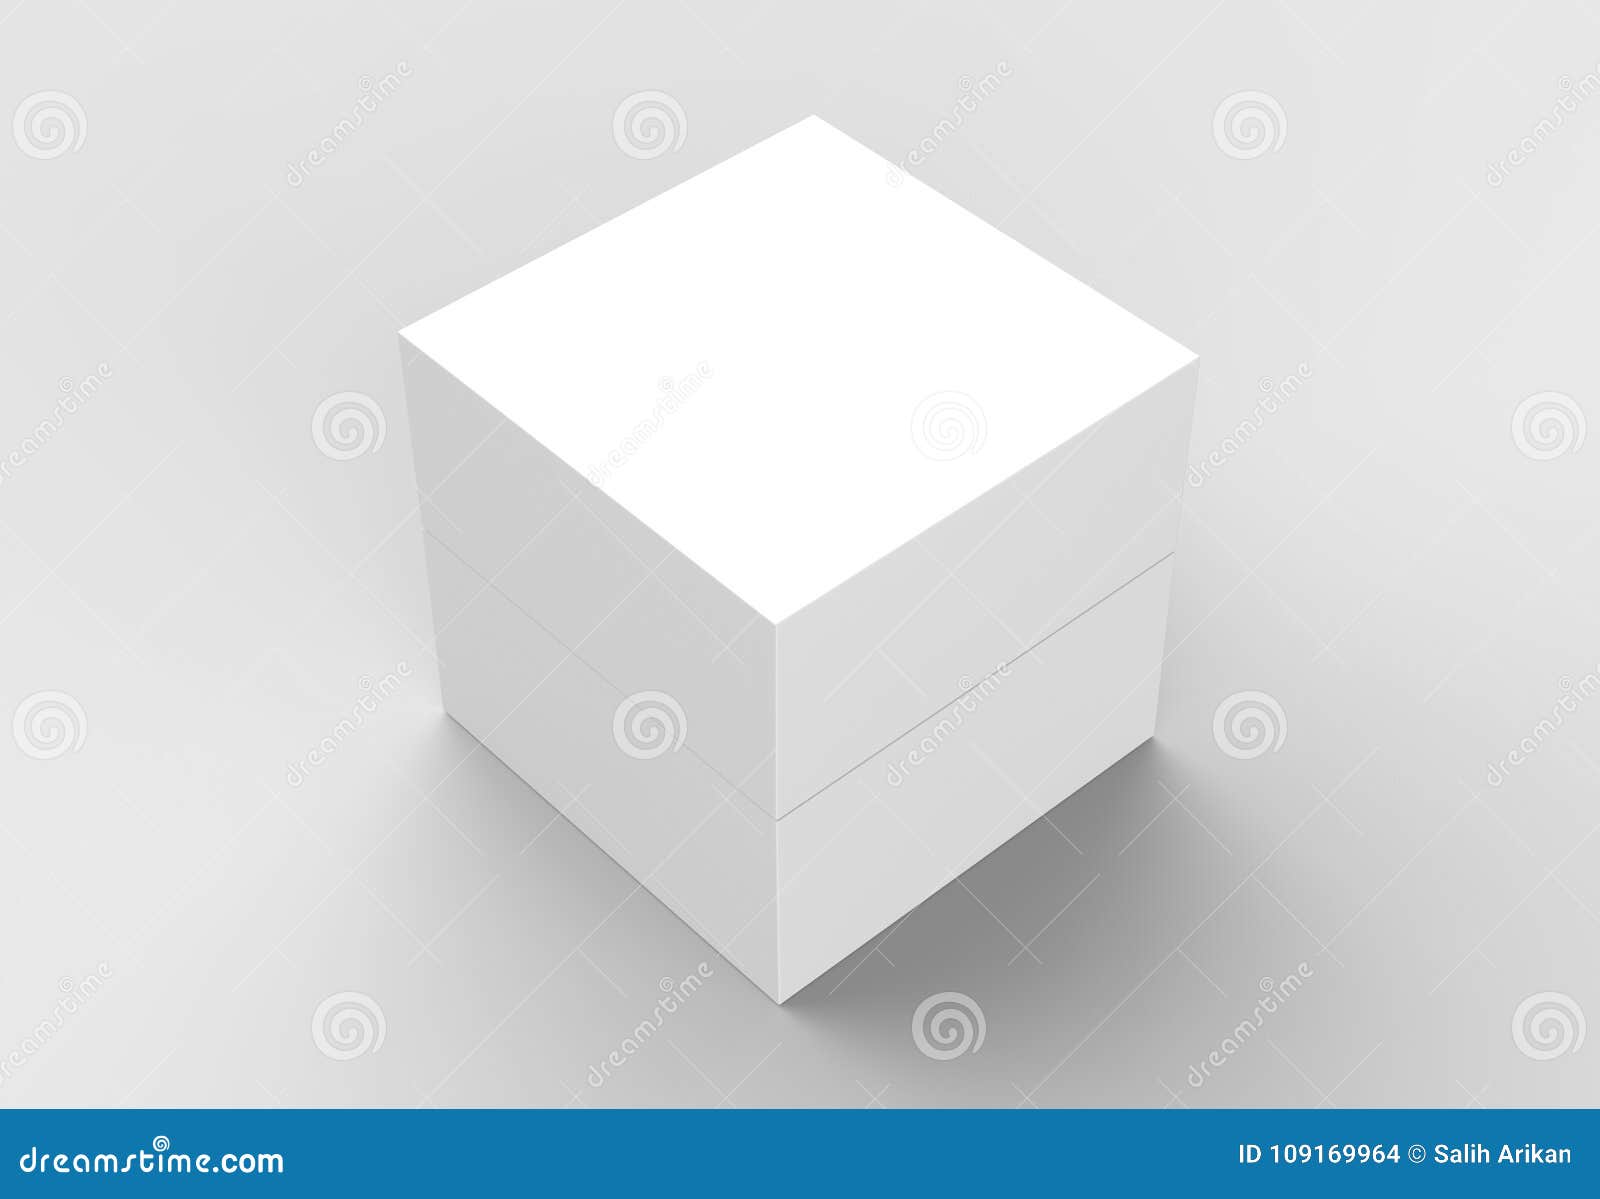 Download Elegant Box Mock Up Isolated On Soft Gray Background. 3D ...